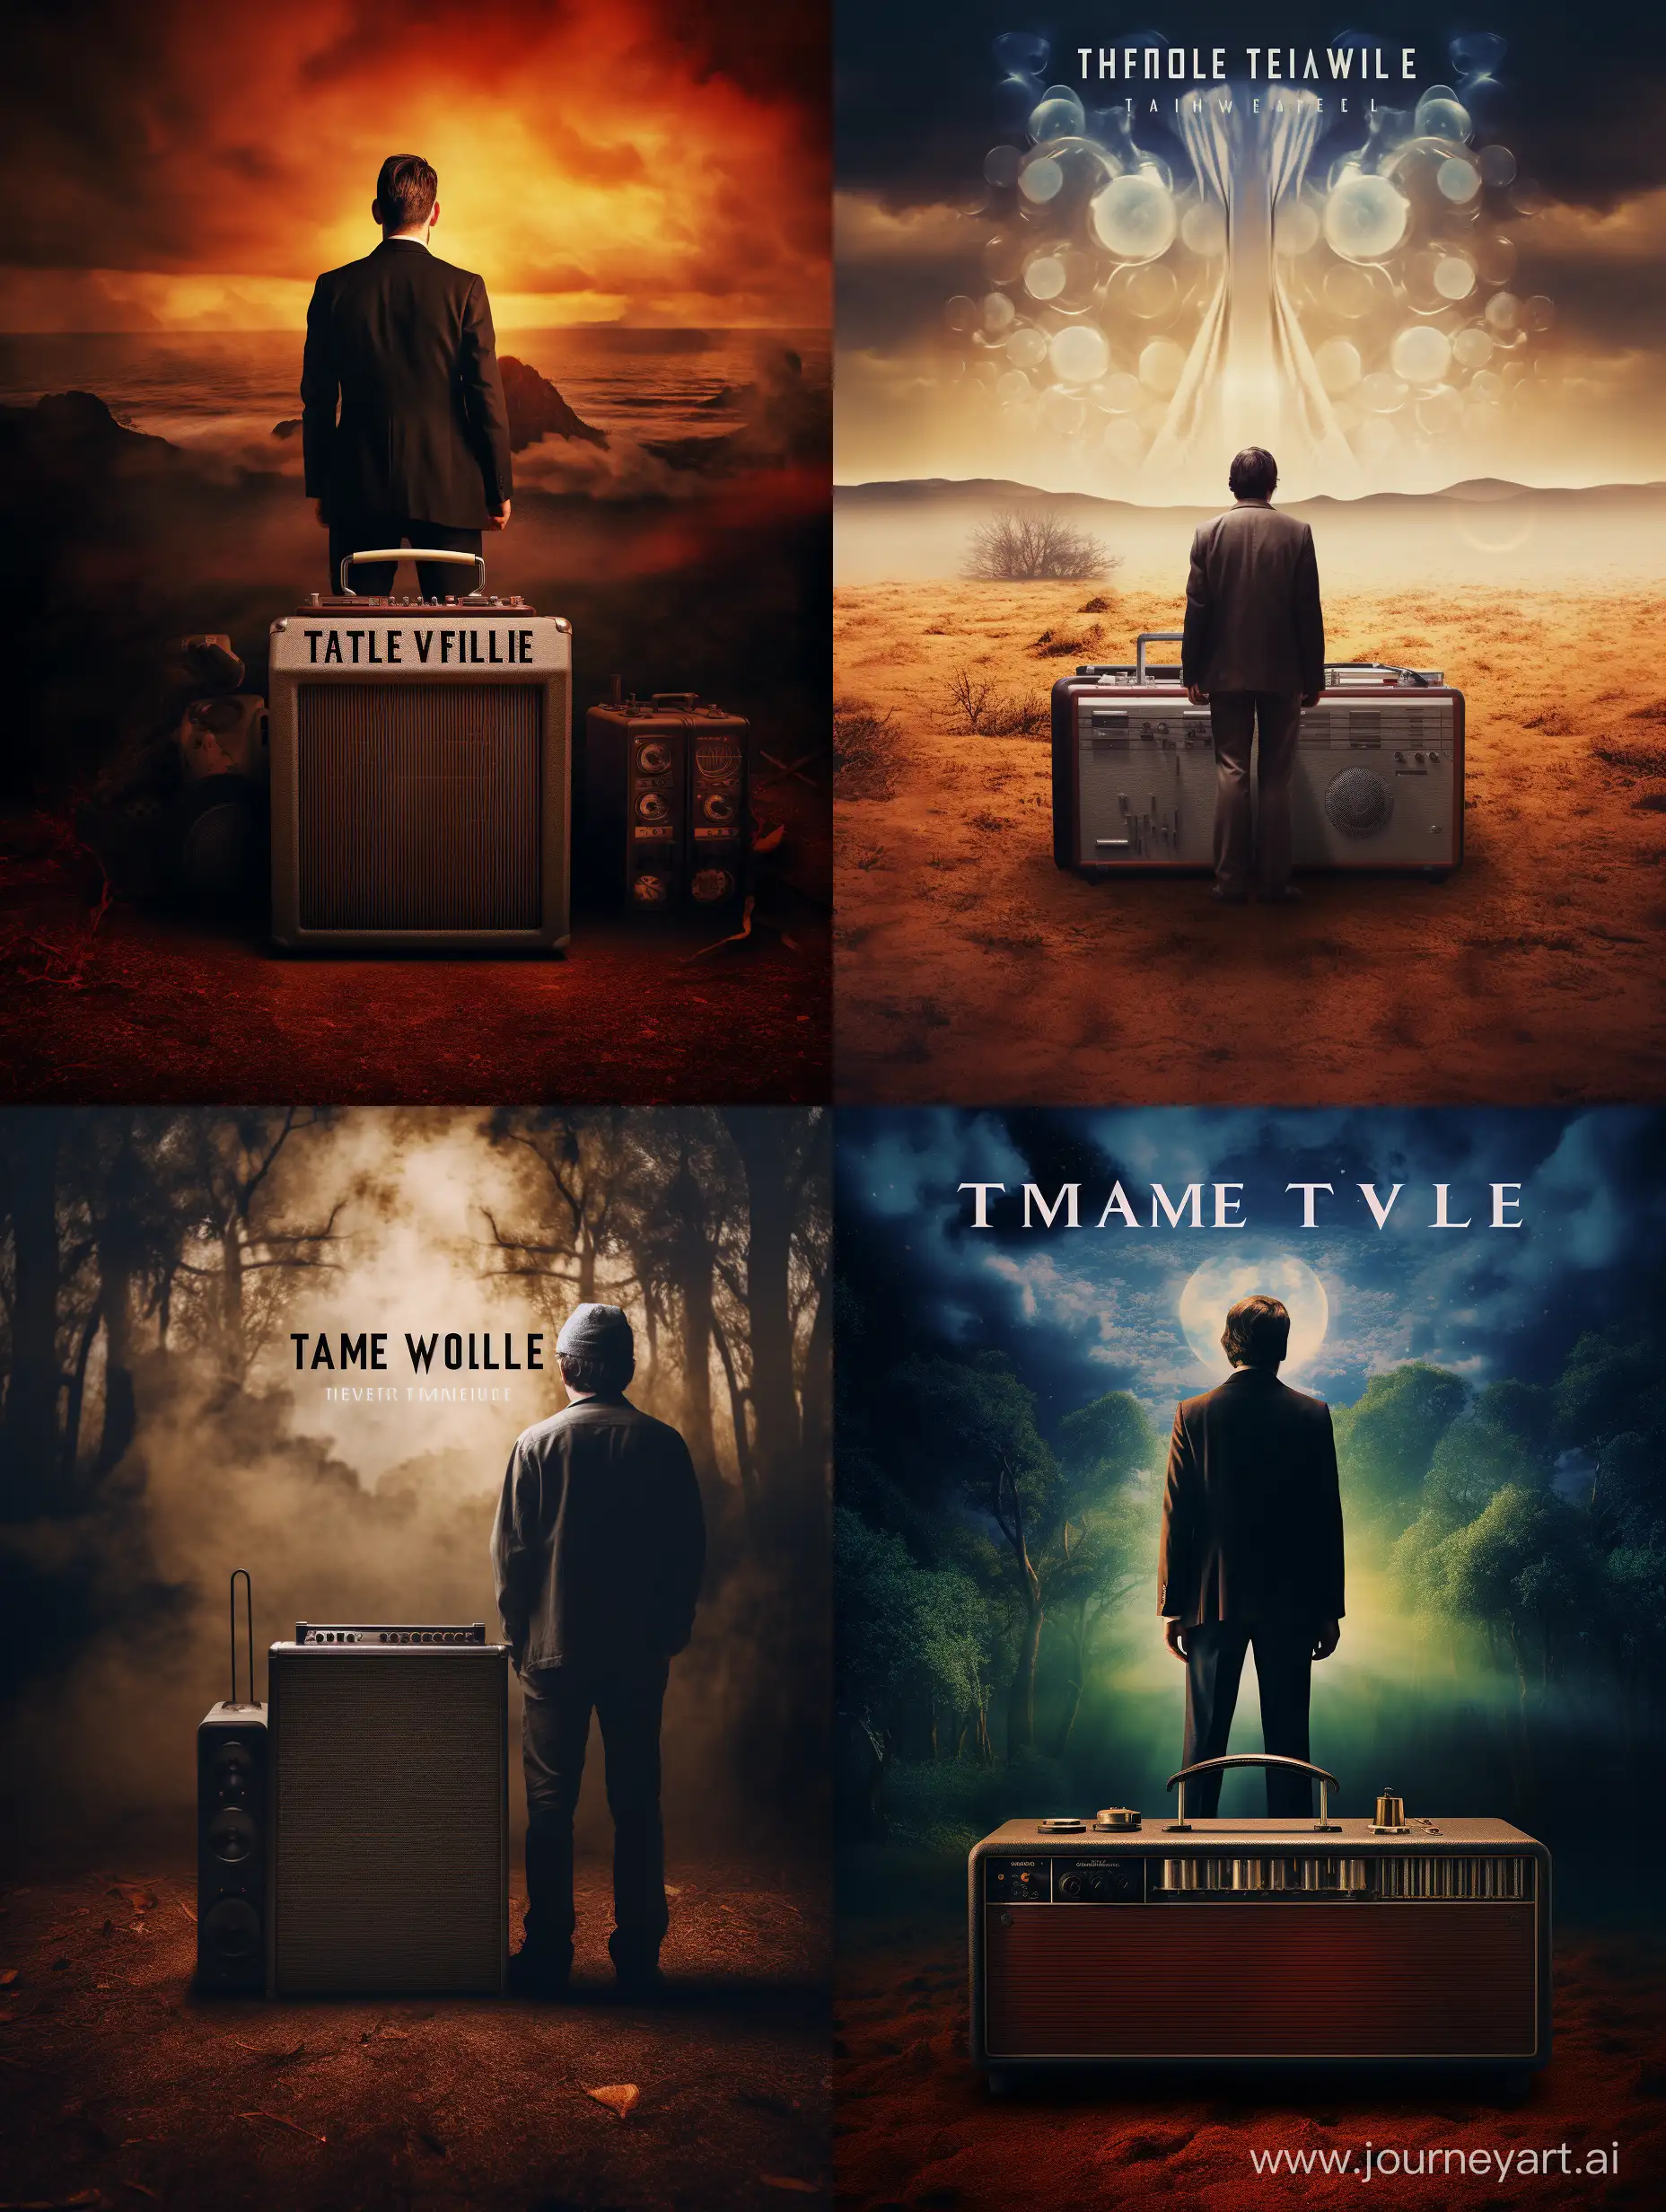 A man standing with an old amplifier, timetravel movie poster